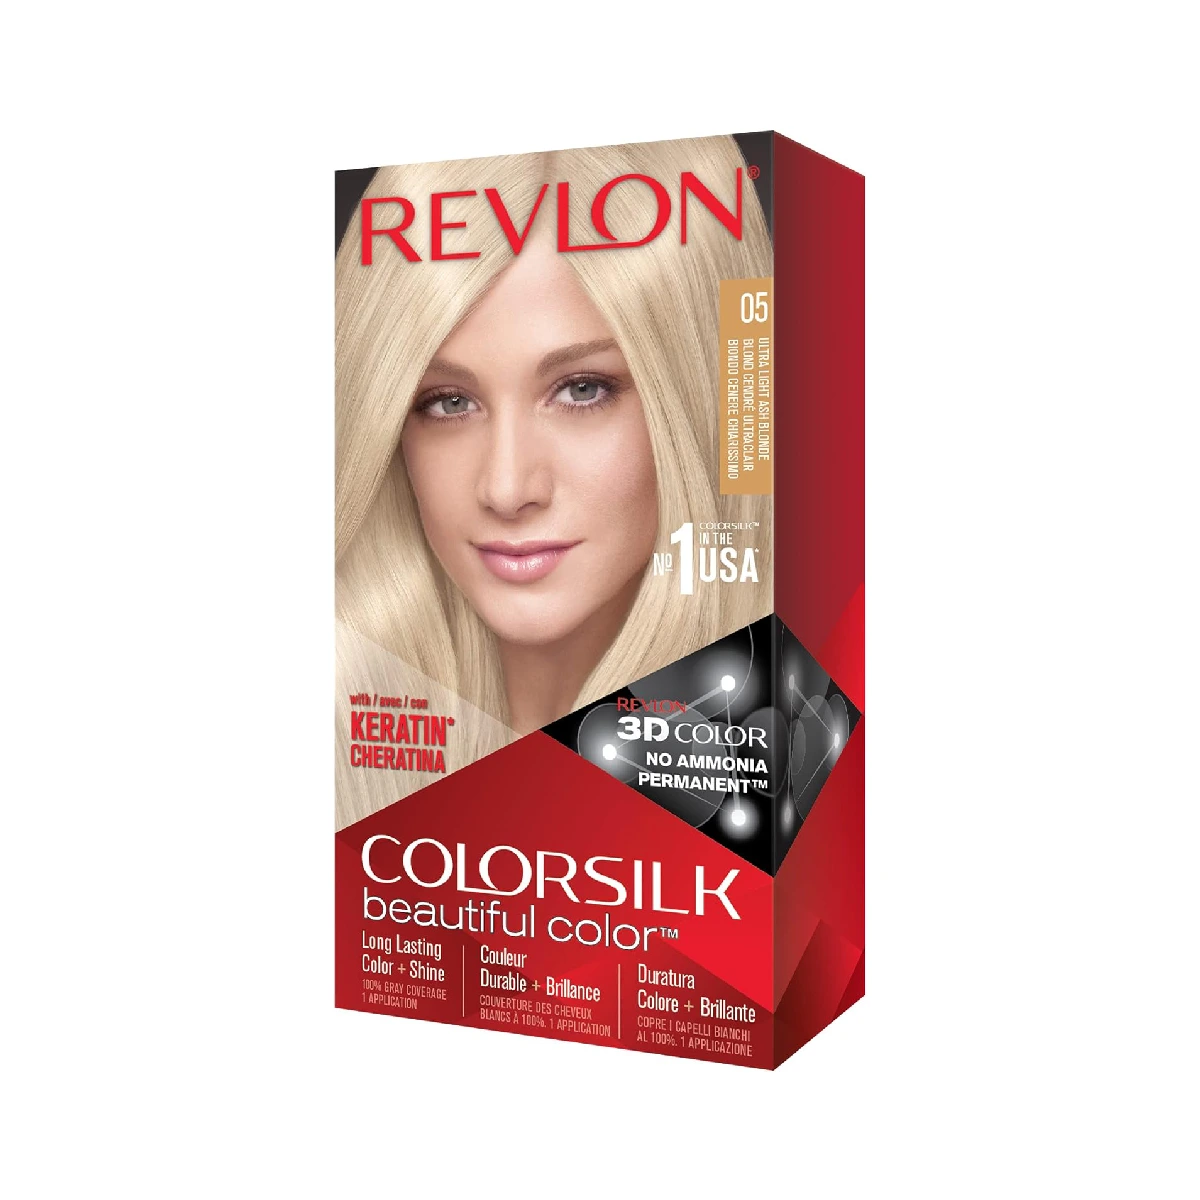 Revlon Colorsilk Haircolor box with color swatch on a white background.